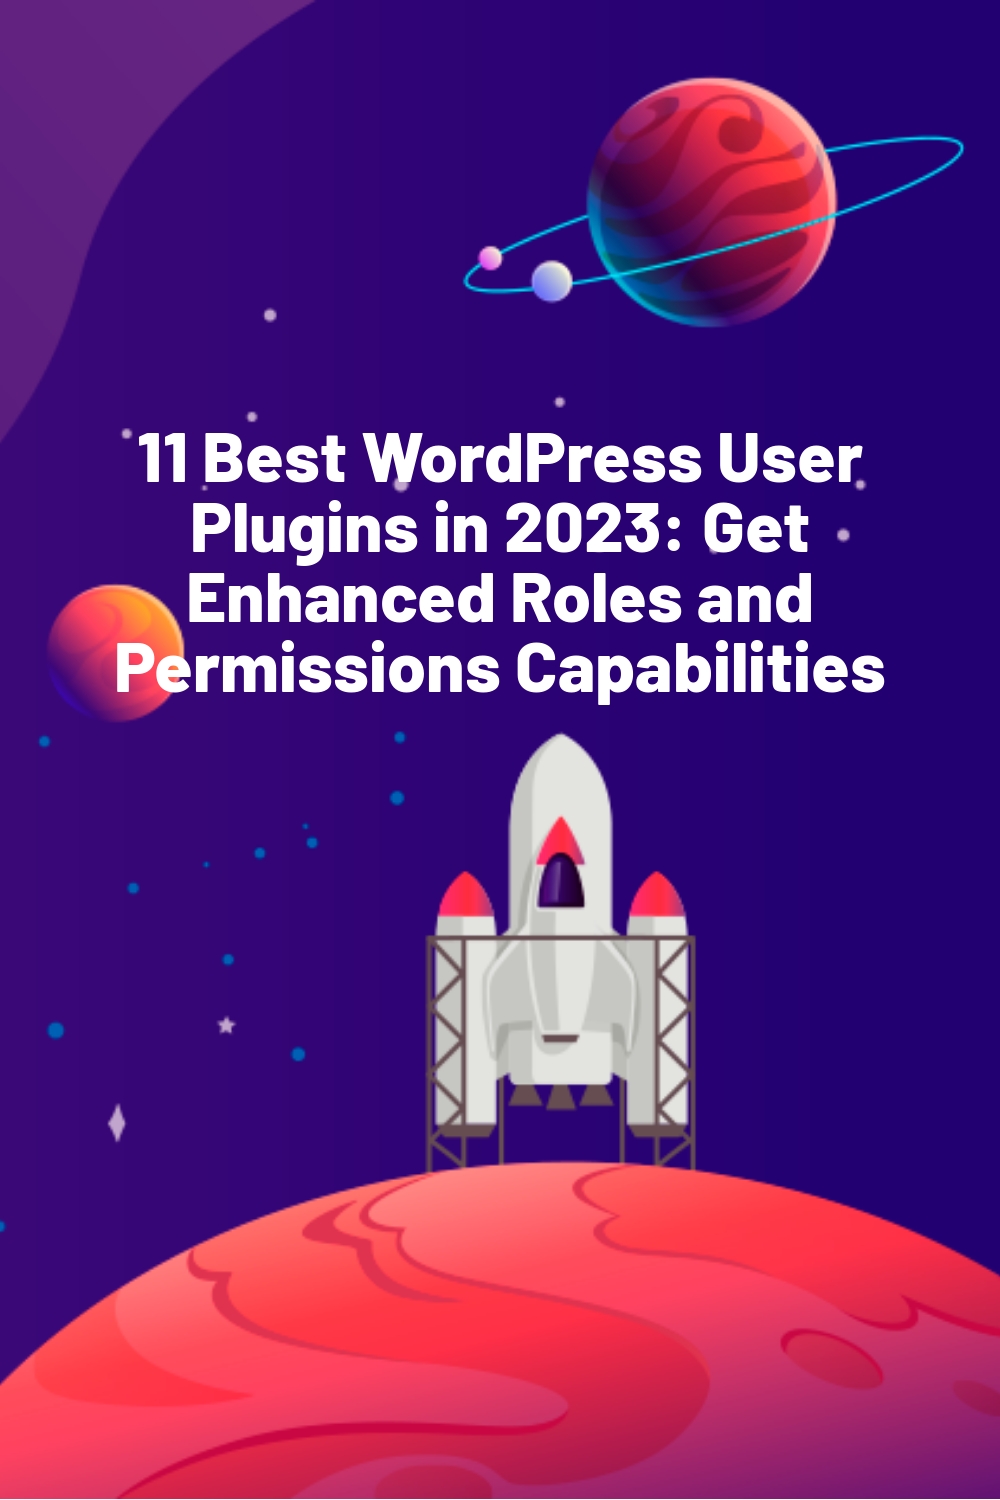 11 Best WordPress User Plugins in 2023: Get Enhanced Roles and Permissions Capabilities